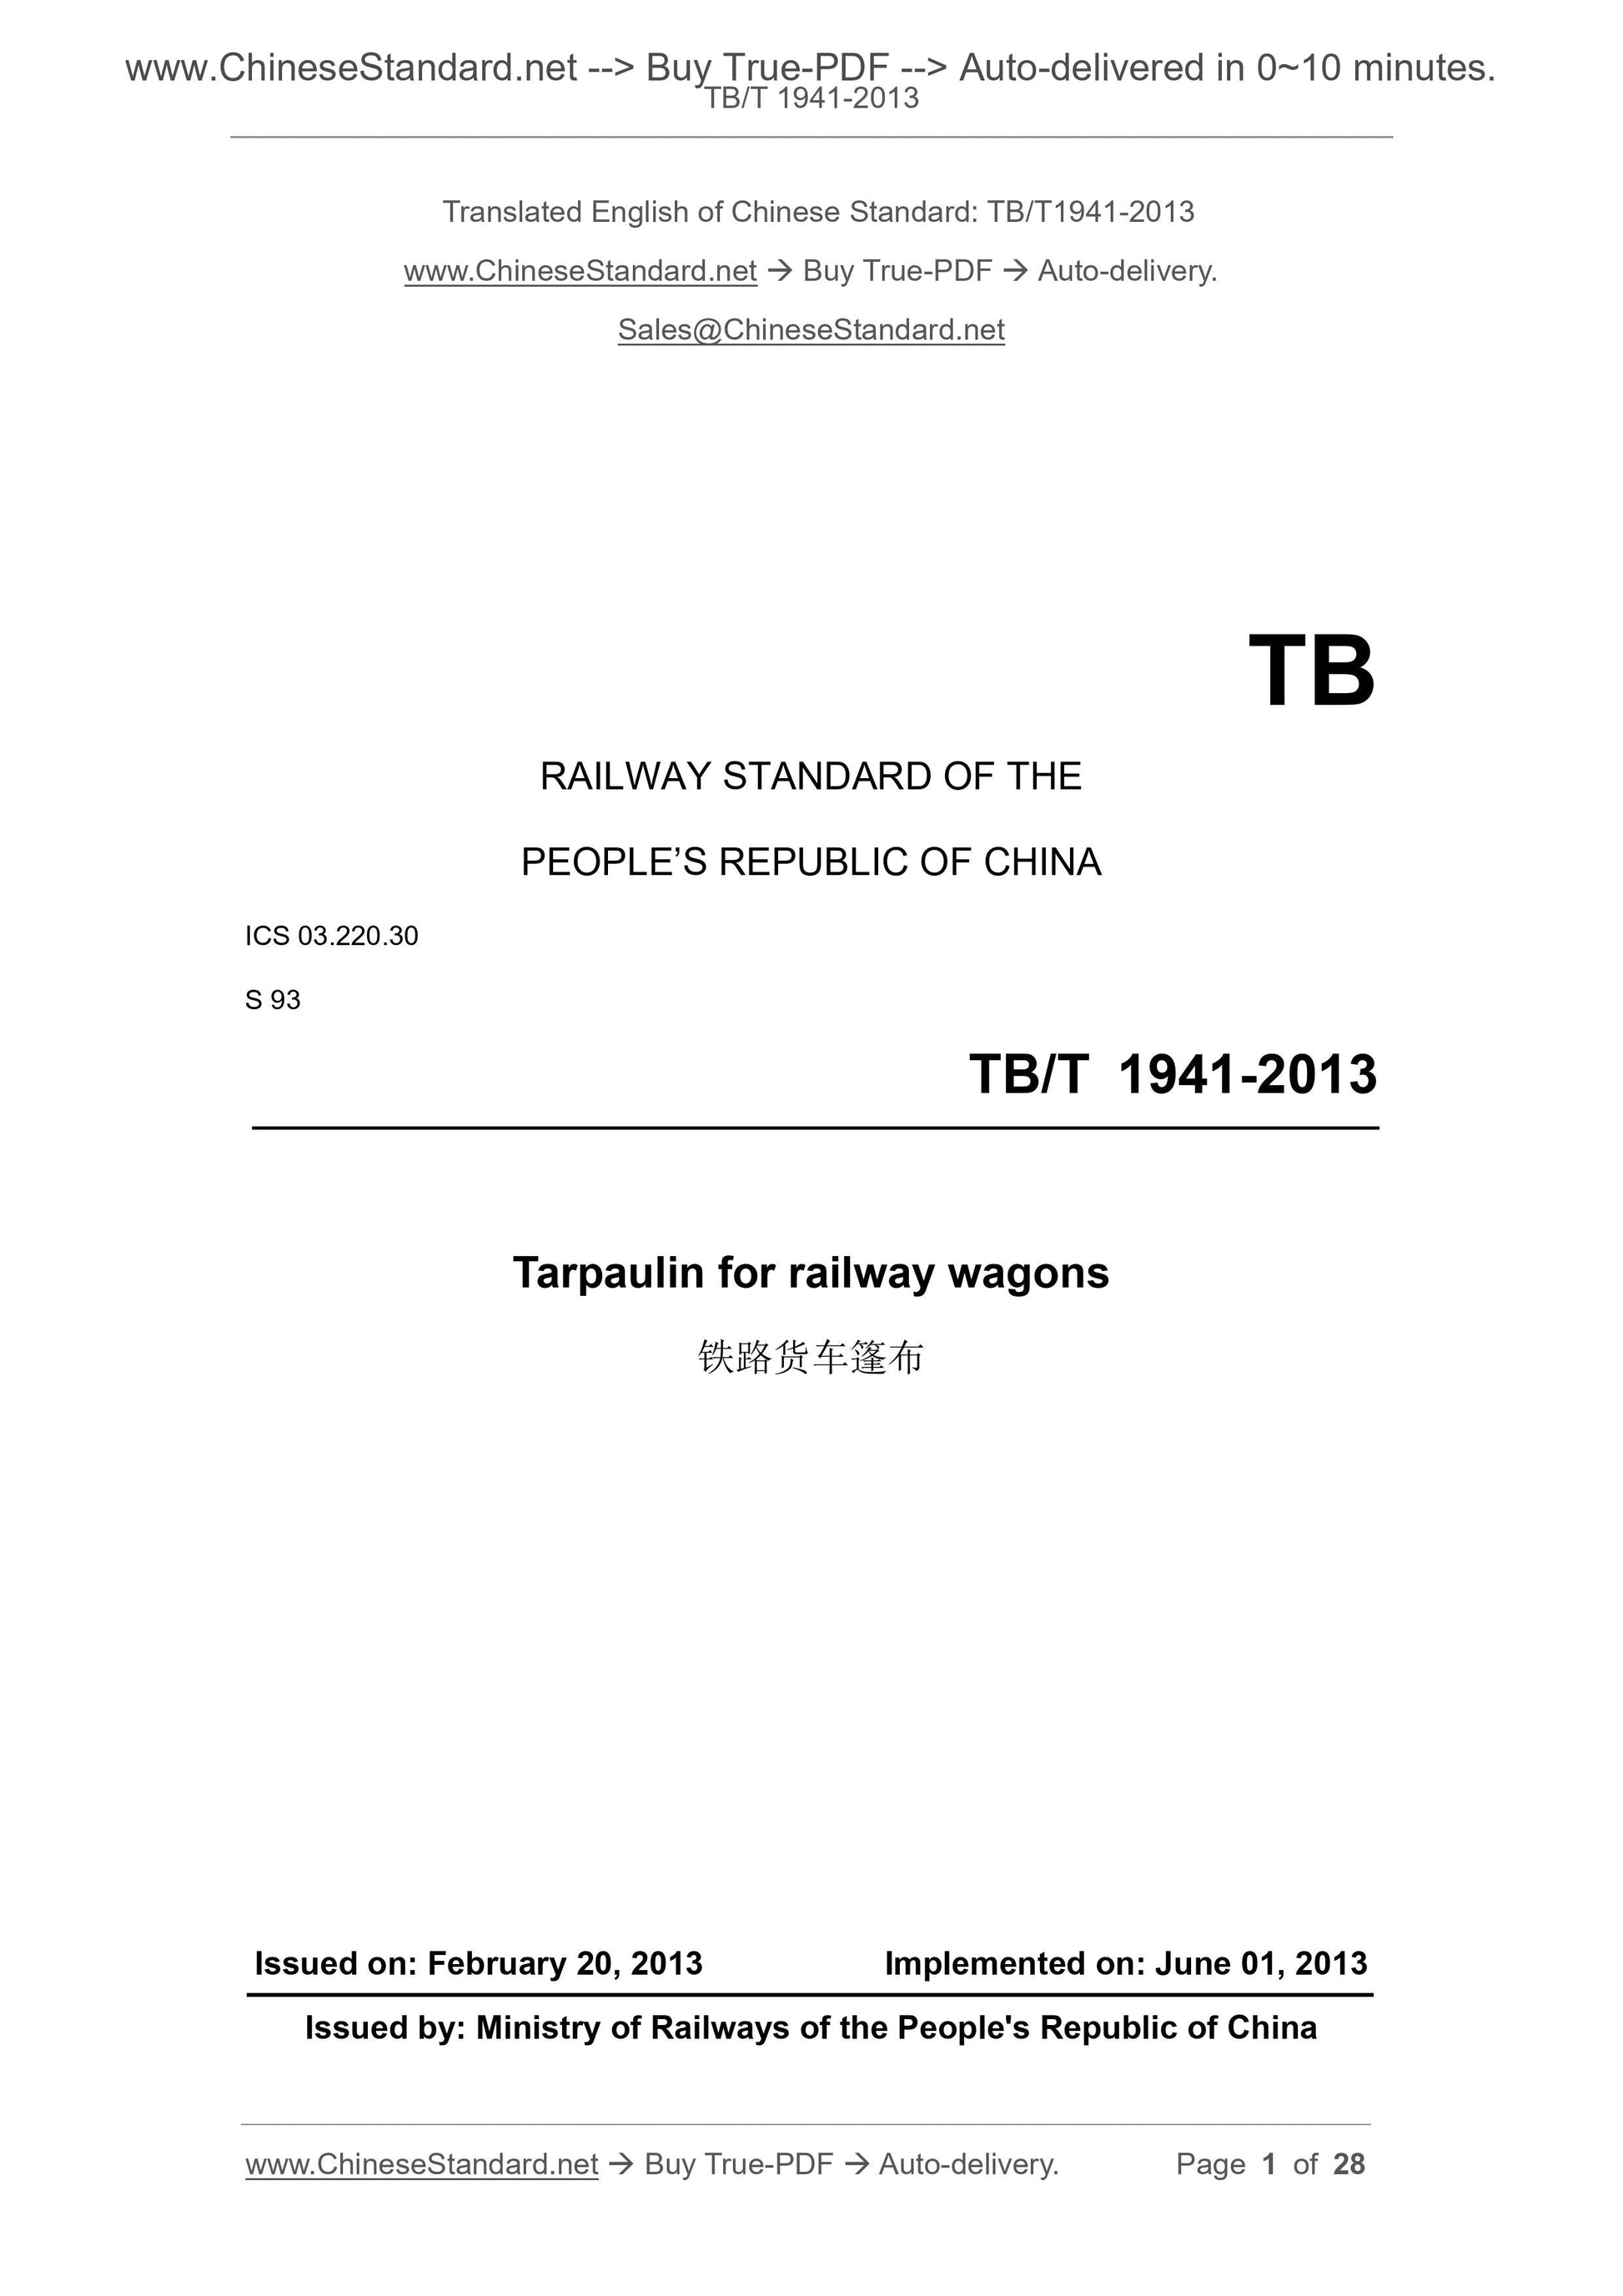 TB/T 1941-2013 Page 1